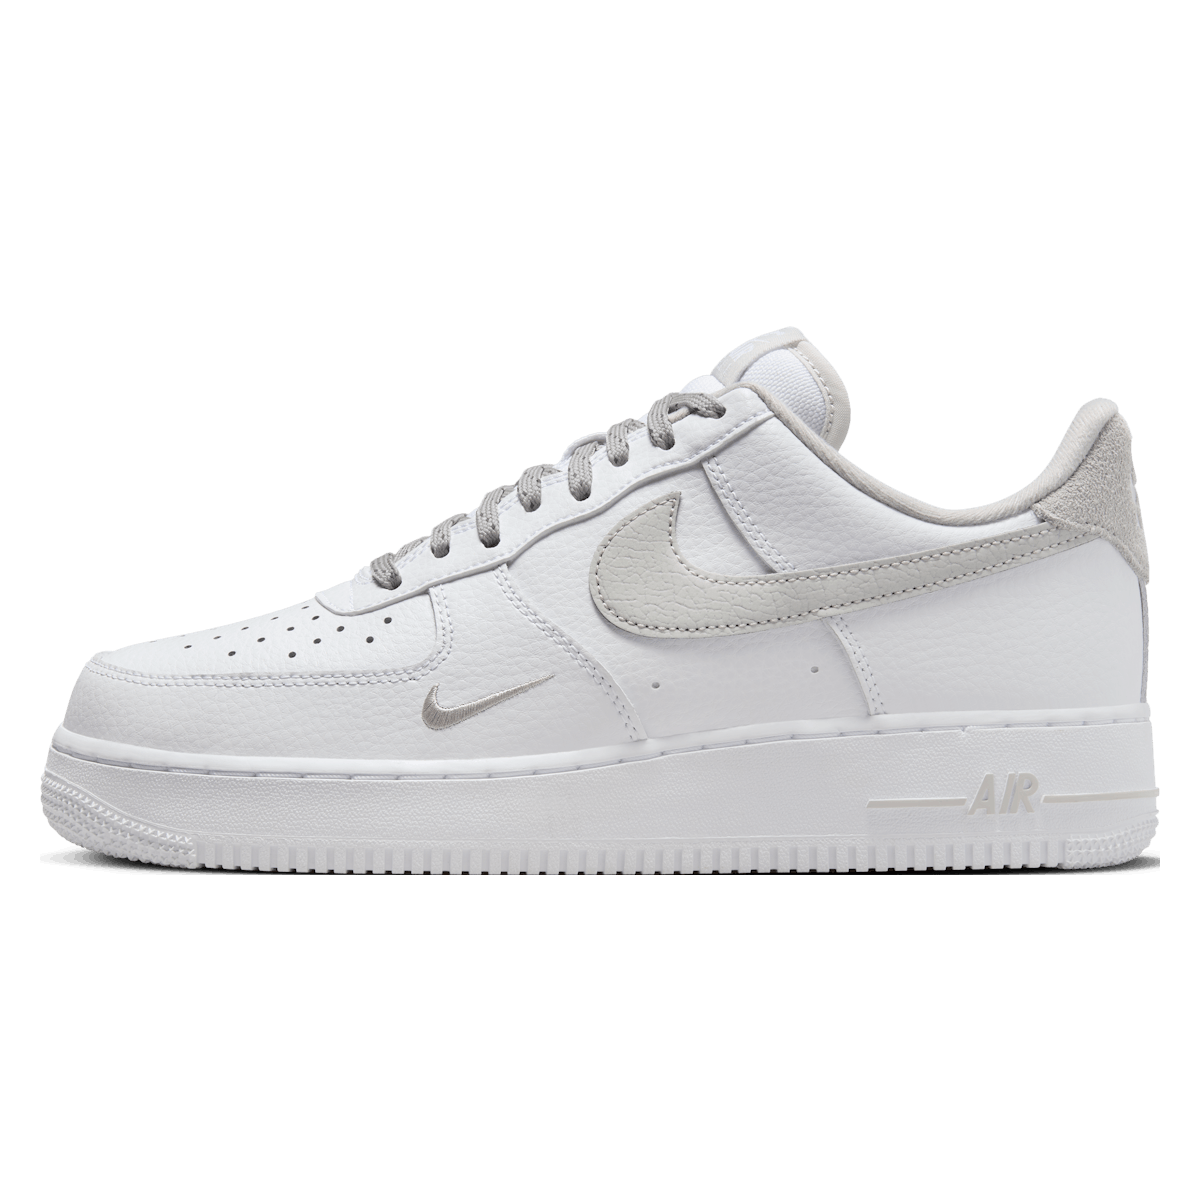 Nike Air Force 1 '07 "Reflect Silver"